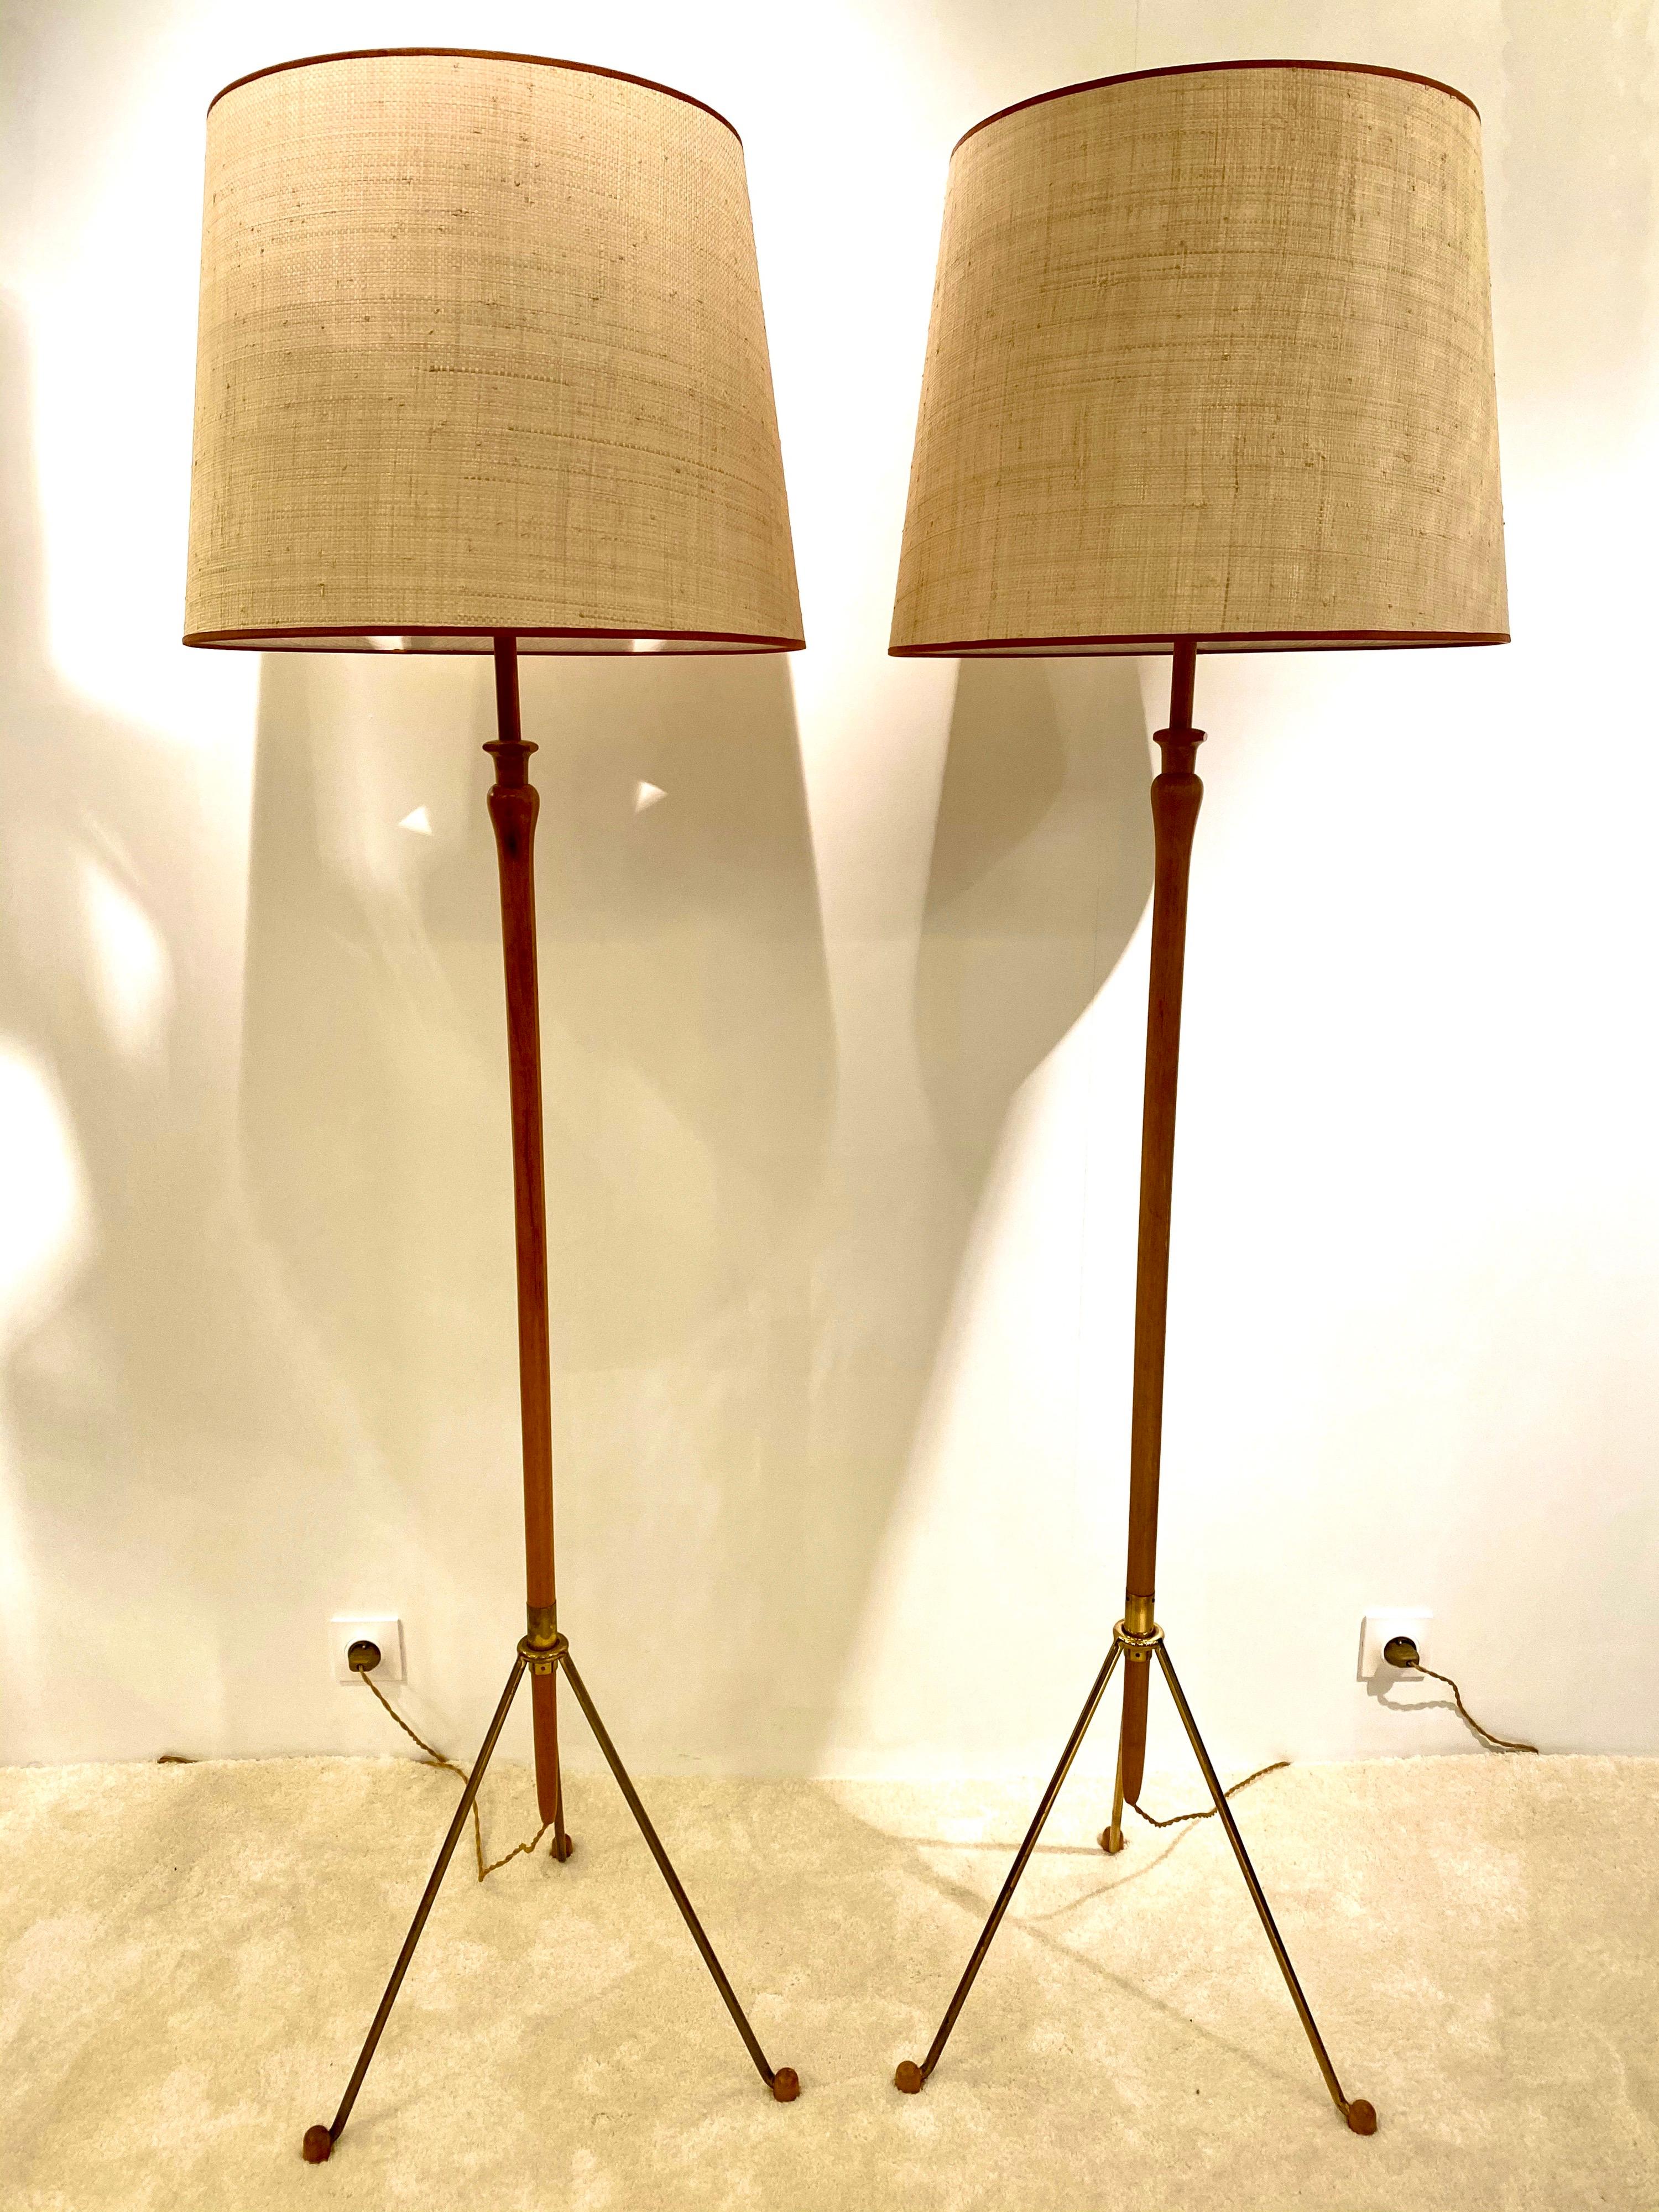 A pair of long lean floor lamps made of cheer wood and the frame is made off raffia and leather to add elegance and sophistication.
Beautifully made, certainly an Austrian manufacture due to the high quality of the finishes (in the taste of Carl